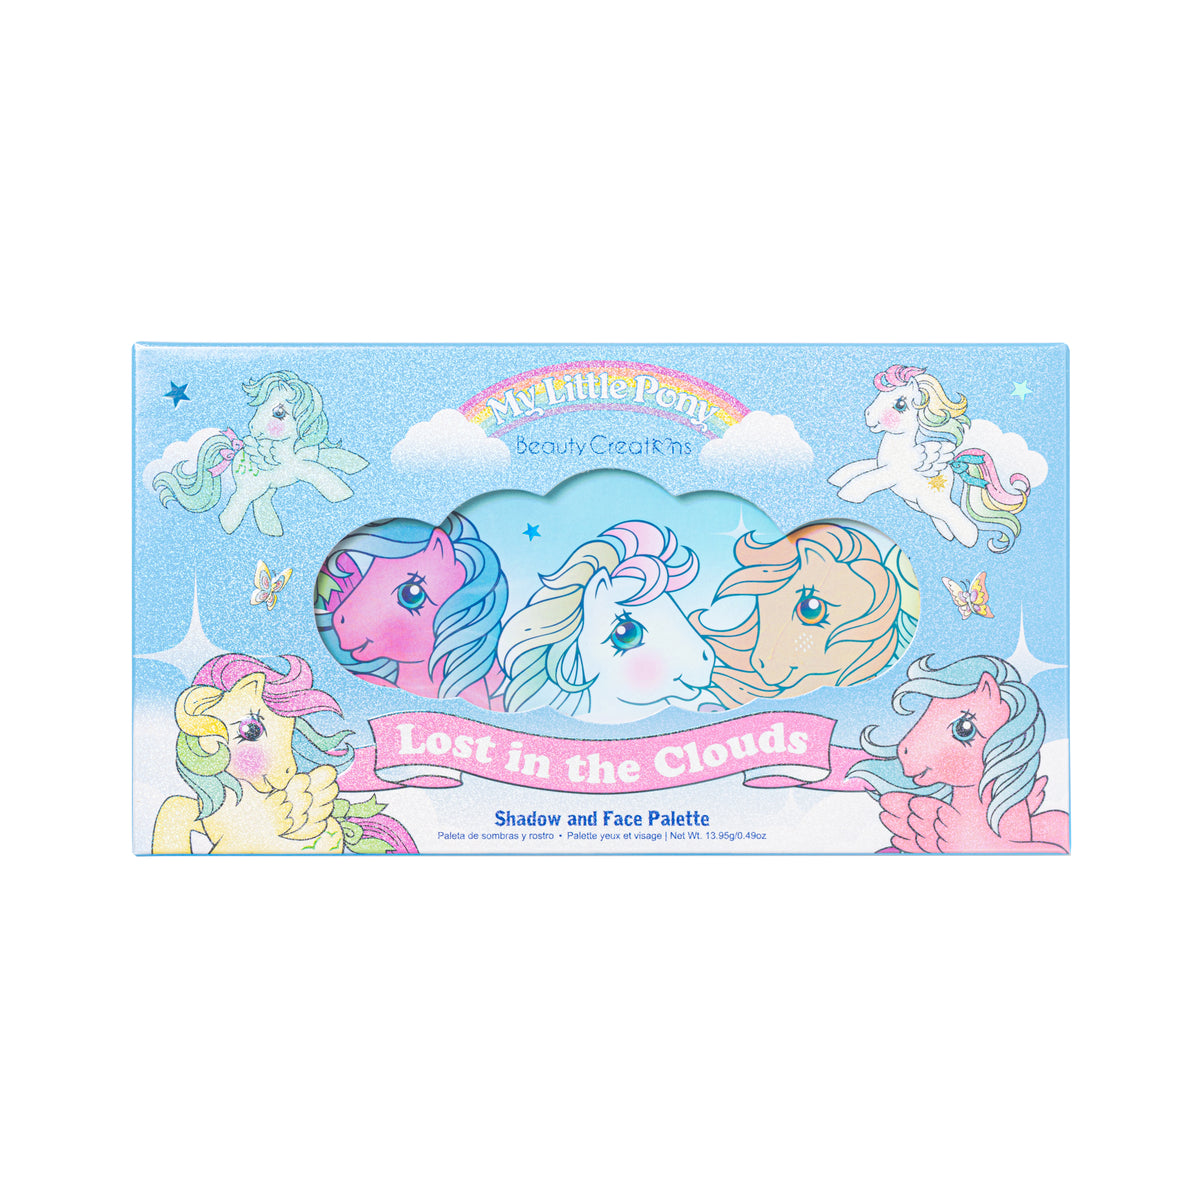 “HEAD IN THE CLOUD" MULTI USE EYE AND FACE  PALETTE MY LITTLE PONY - BEAUTY CREATIONS